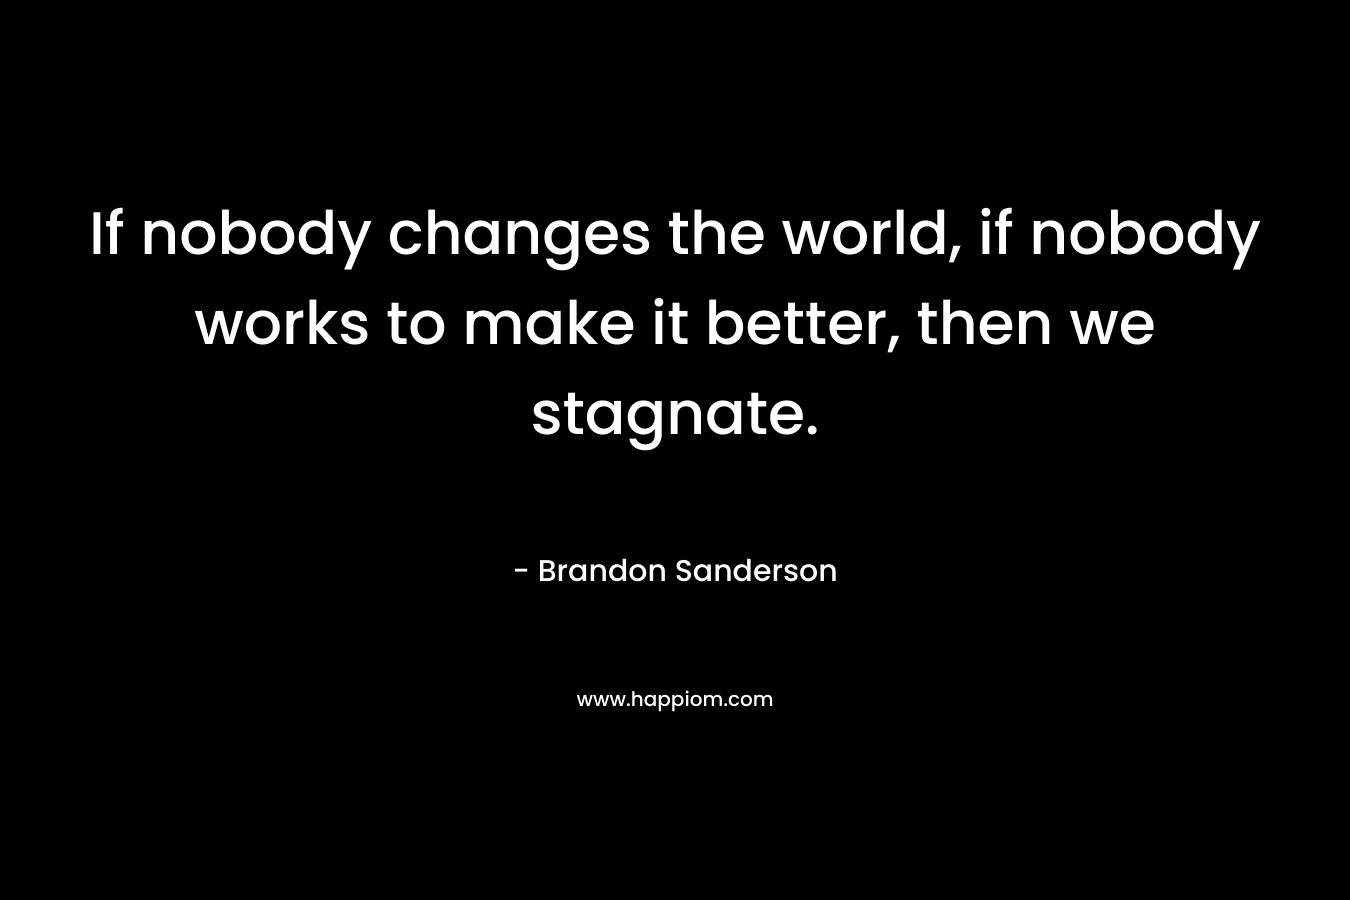 If nobody changes the world, if nobody works to make it better, then we stagnate. – Brandon Sanderson